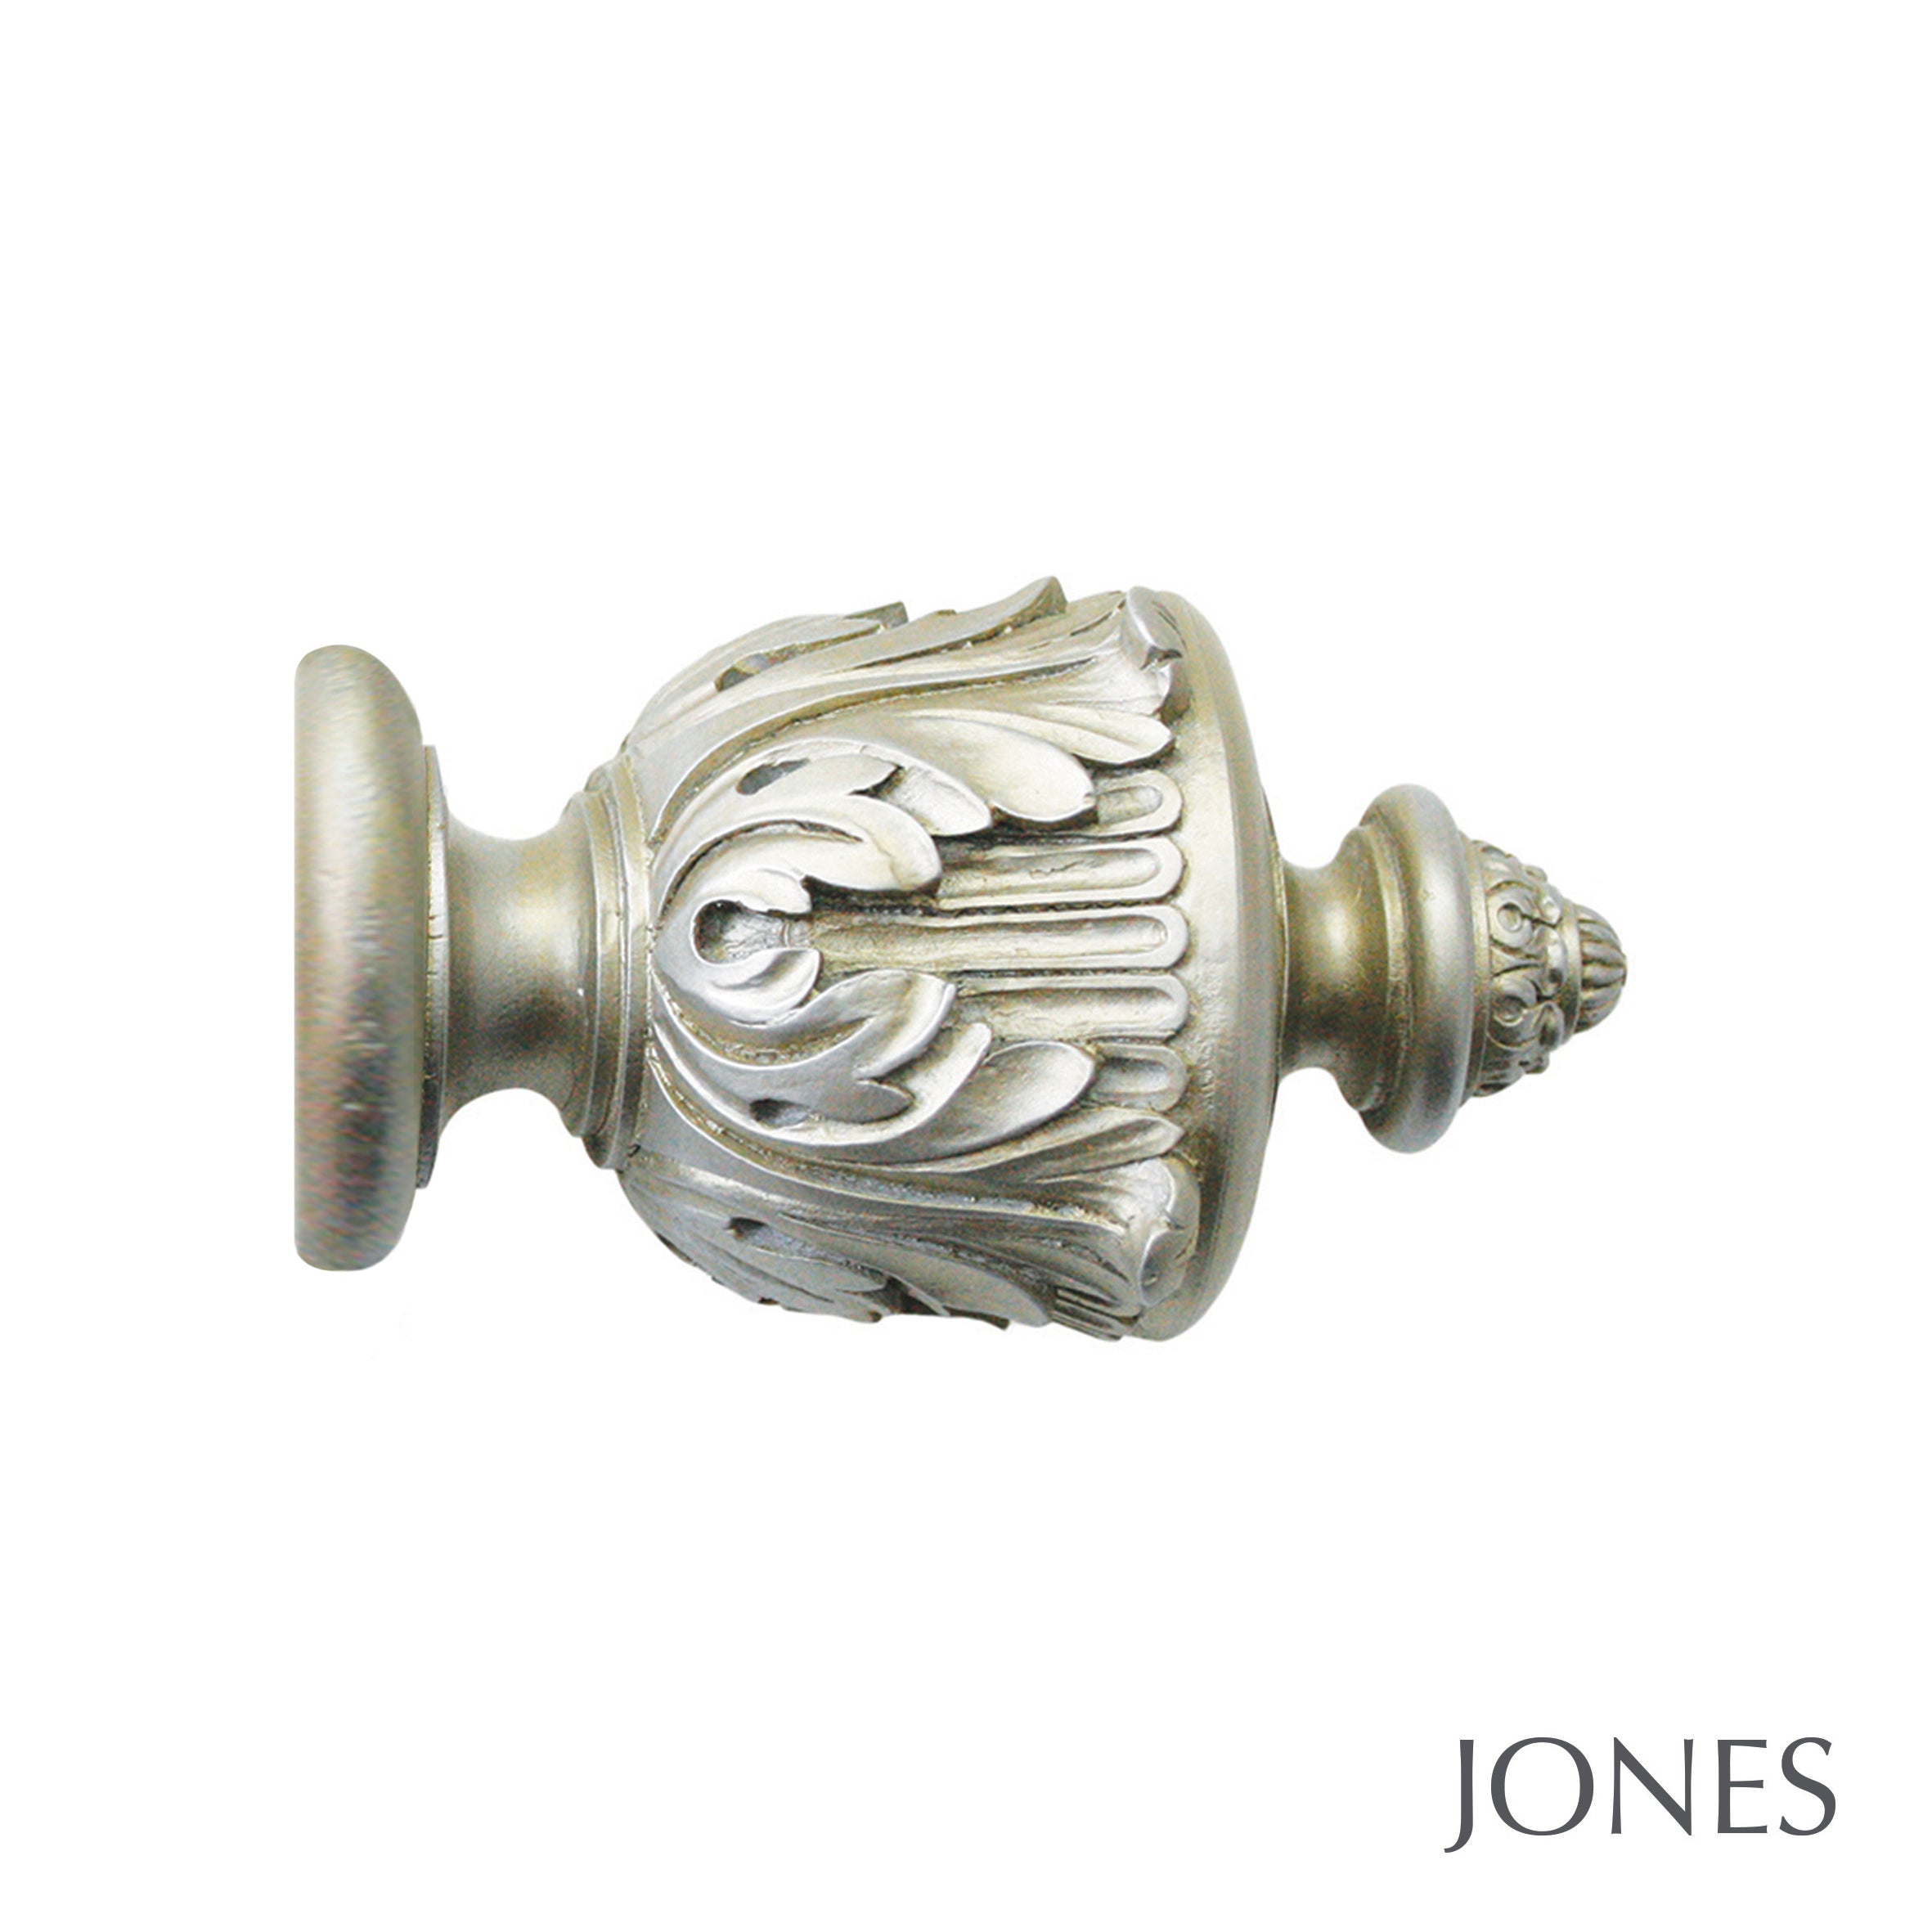 Jones Interiors Florentine Acanthus Finial Curtain Pole Set in Champagne Silver